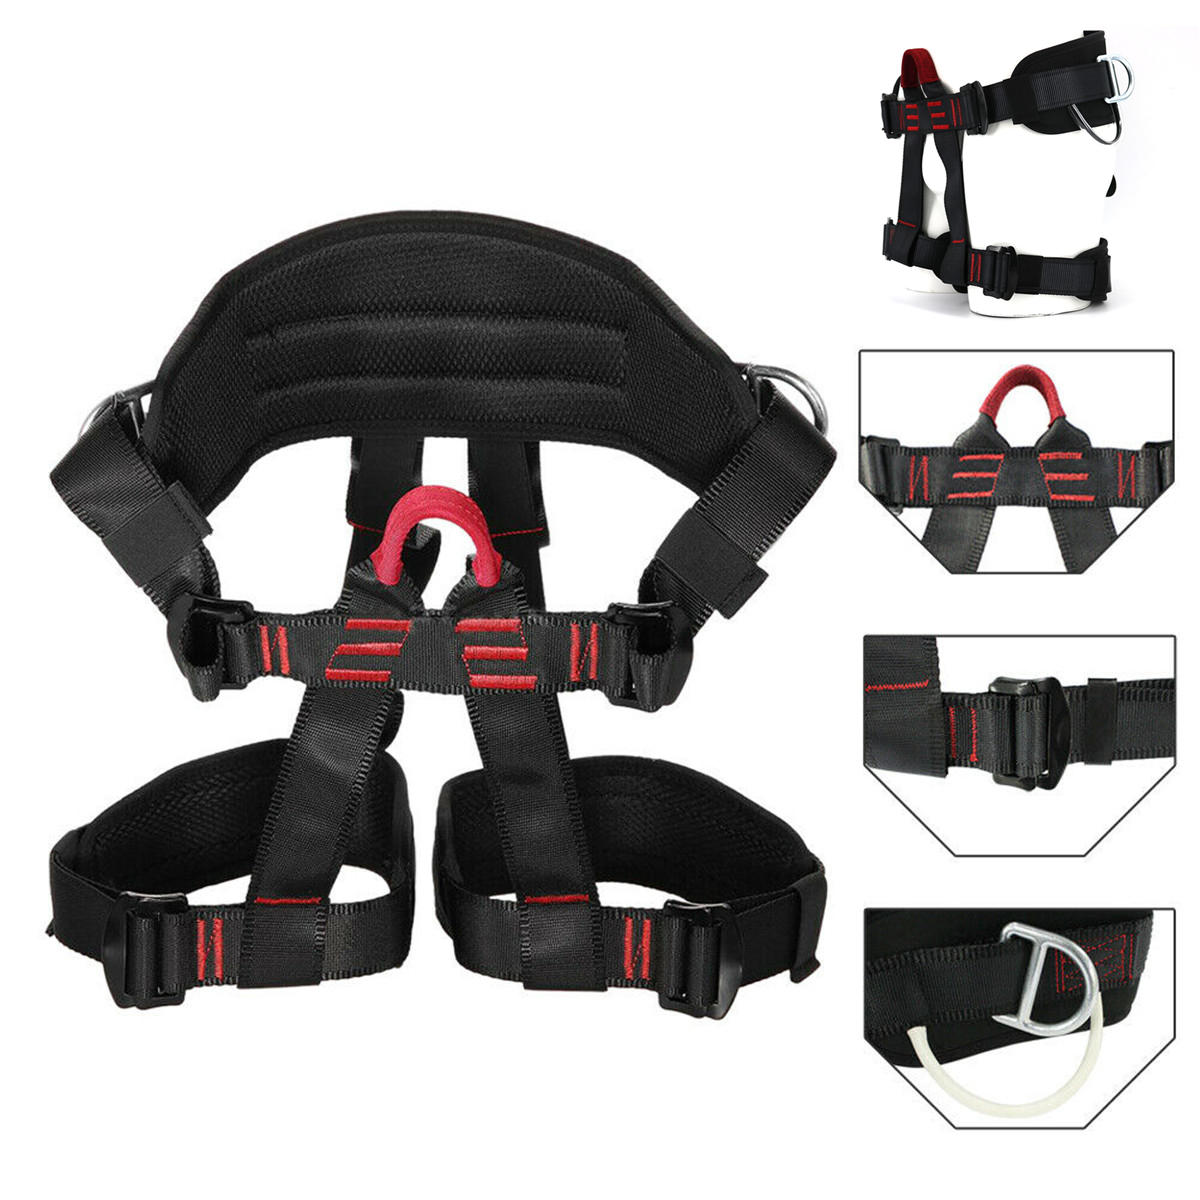 Tree Carving Rock Climbing Harness Equip Gear Rappel Rescue Safety Seat Belt